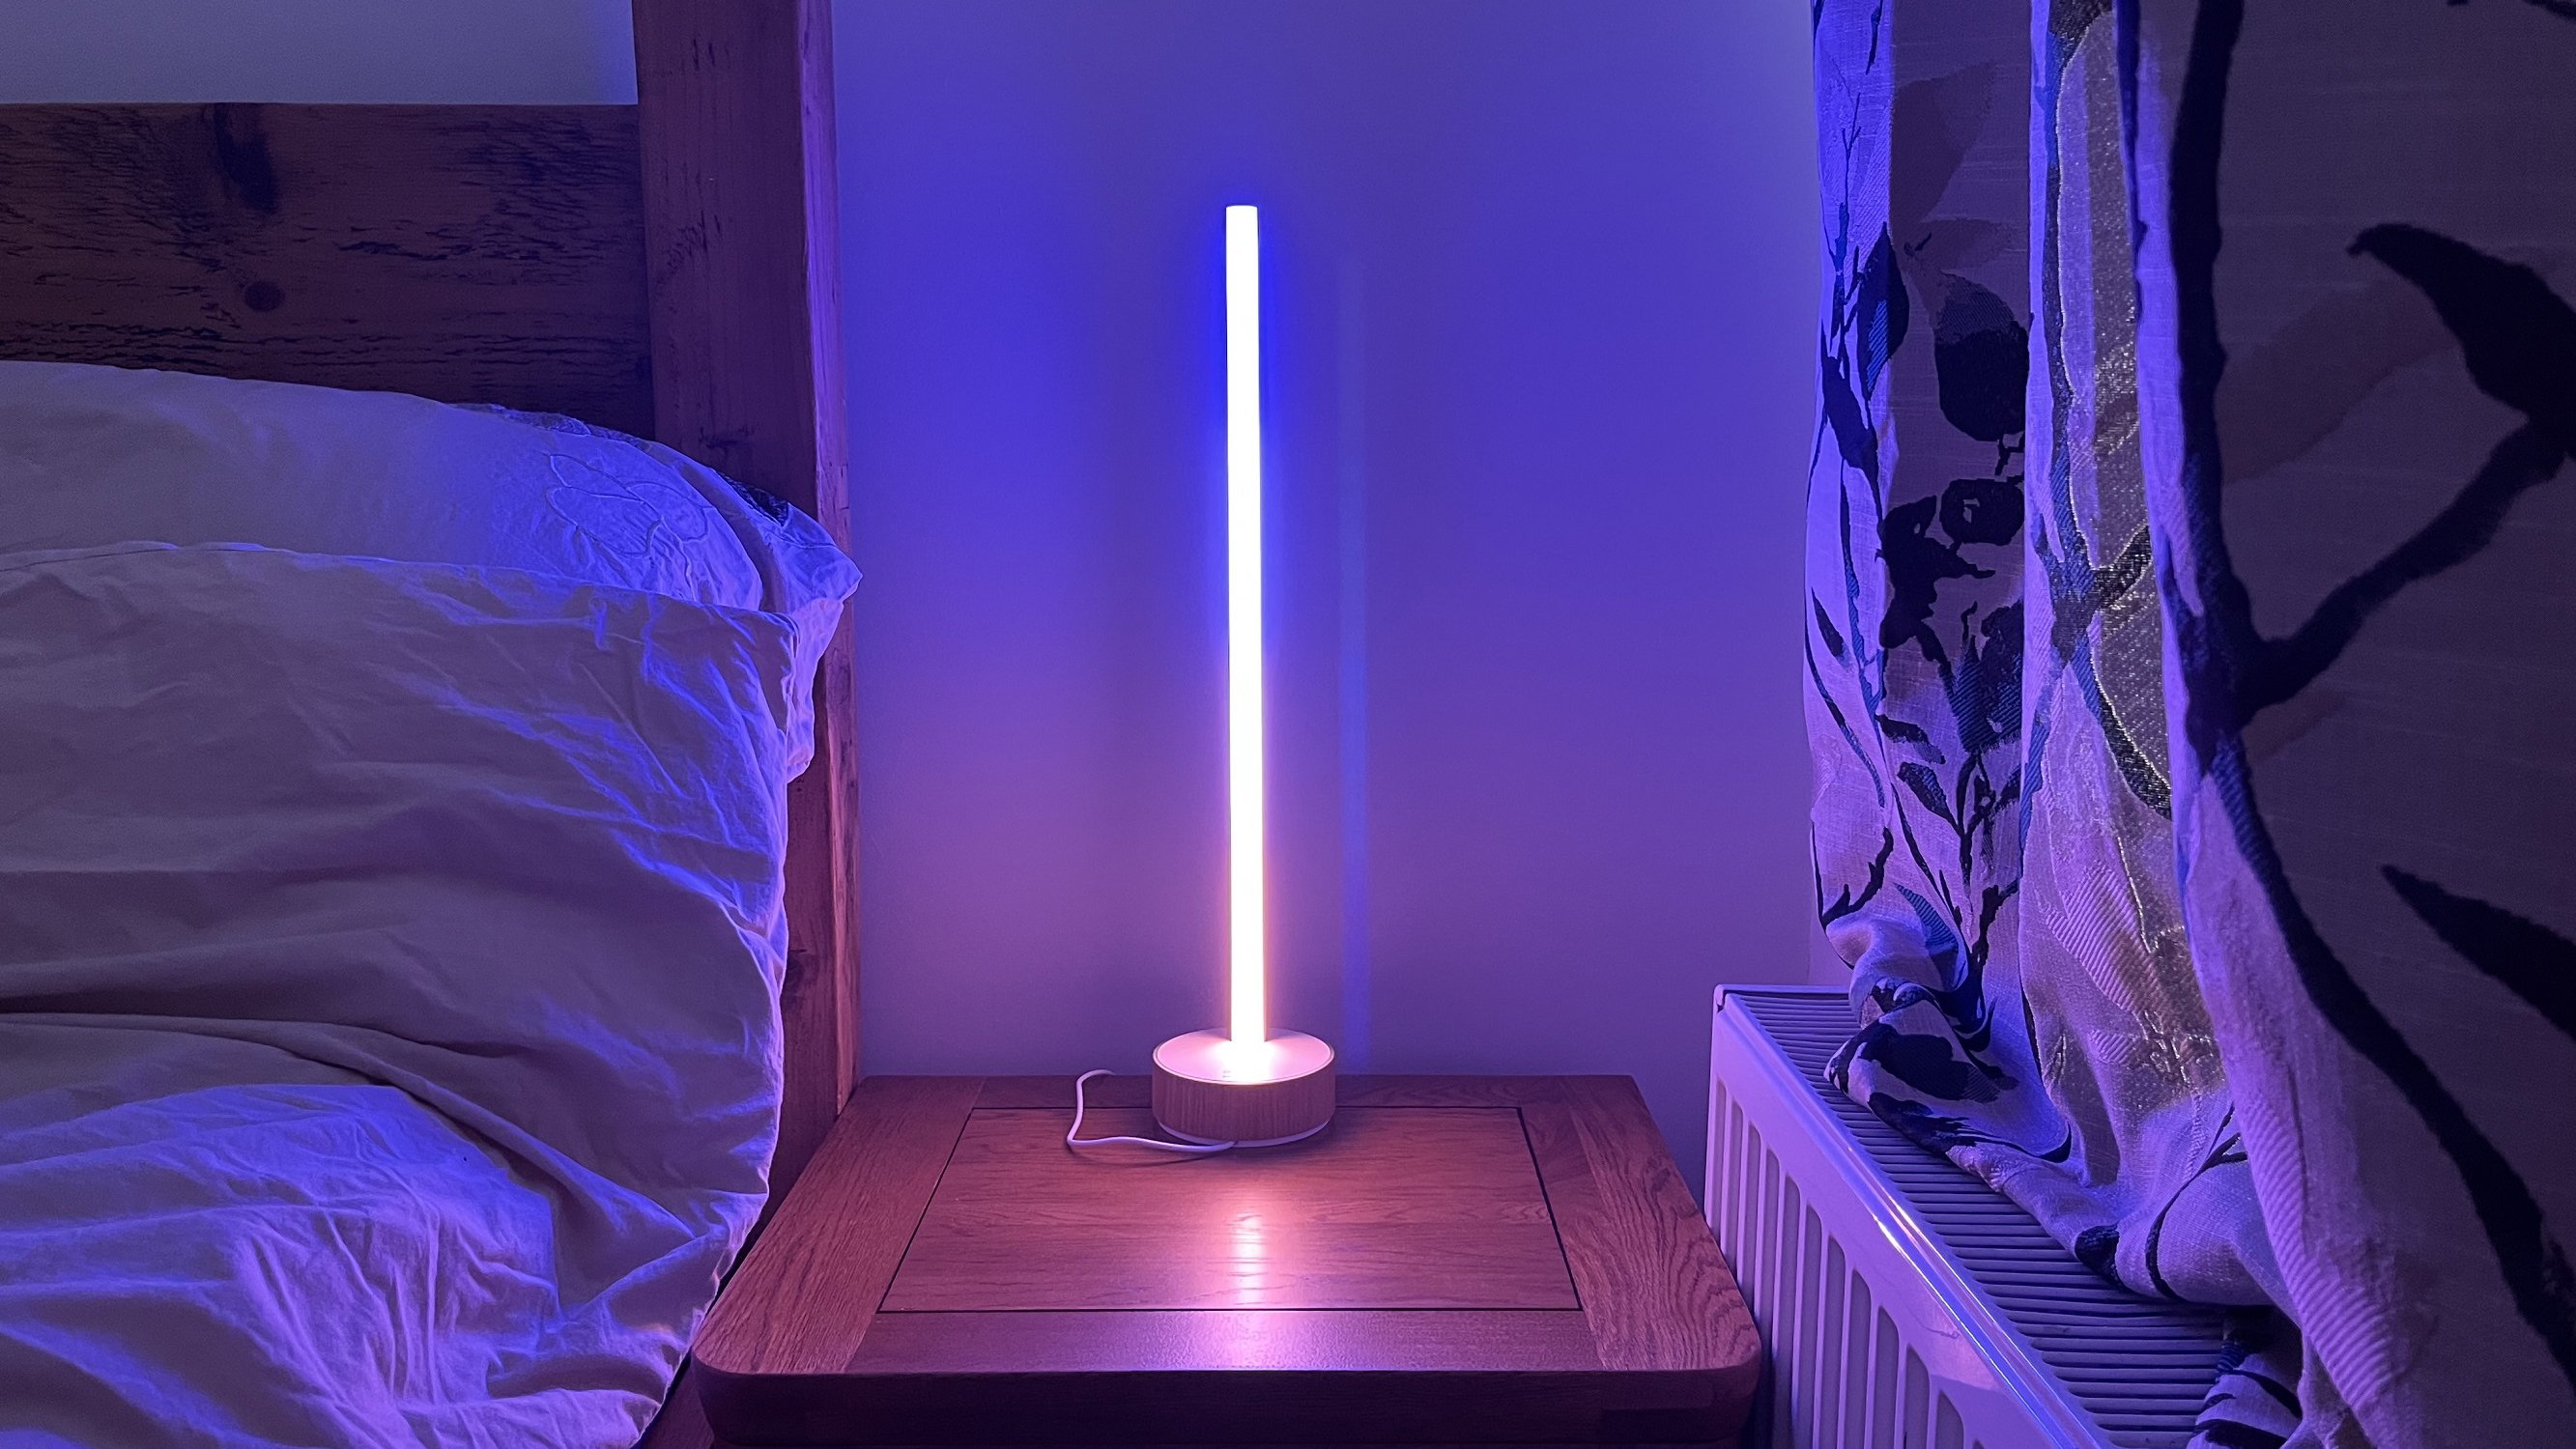 A Philips Hue Signe lamp sitting on a beside table next to some curtains